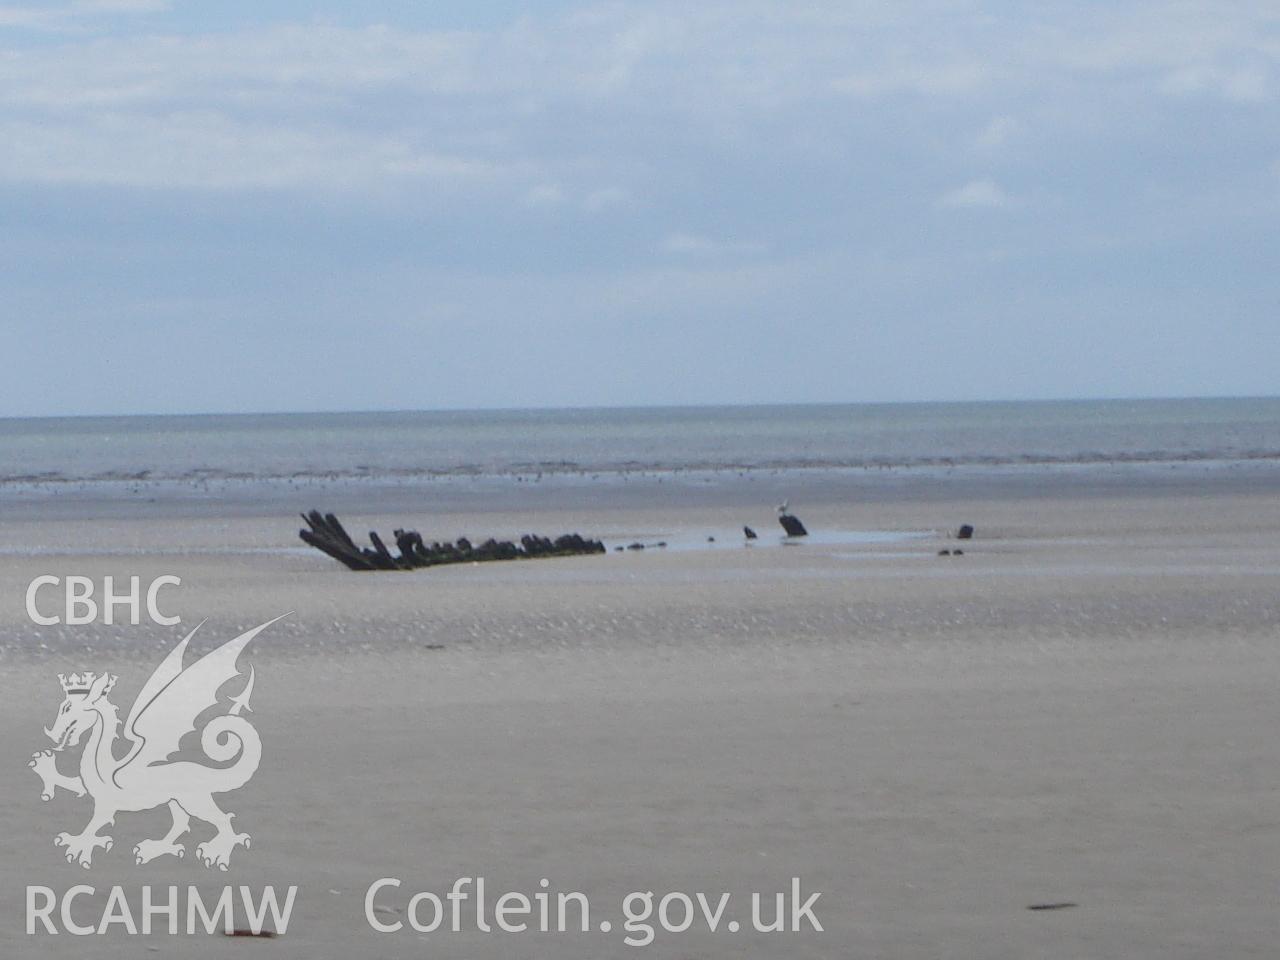 Digital photo showing unnamed wreck at Cefn Sidan, taken by Ian Cundy, August 2010.